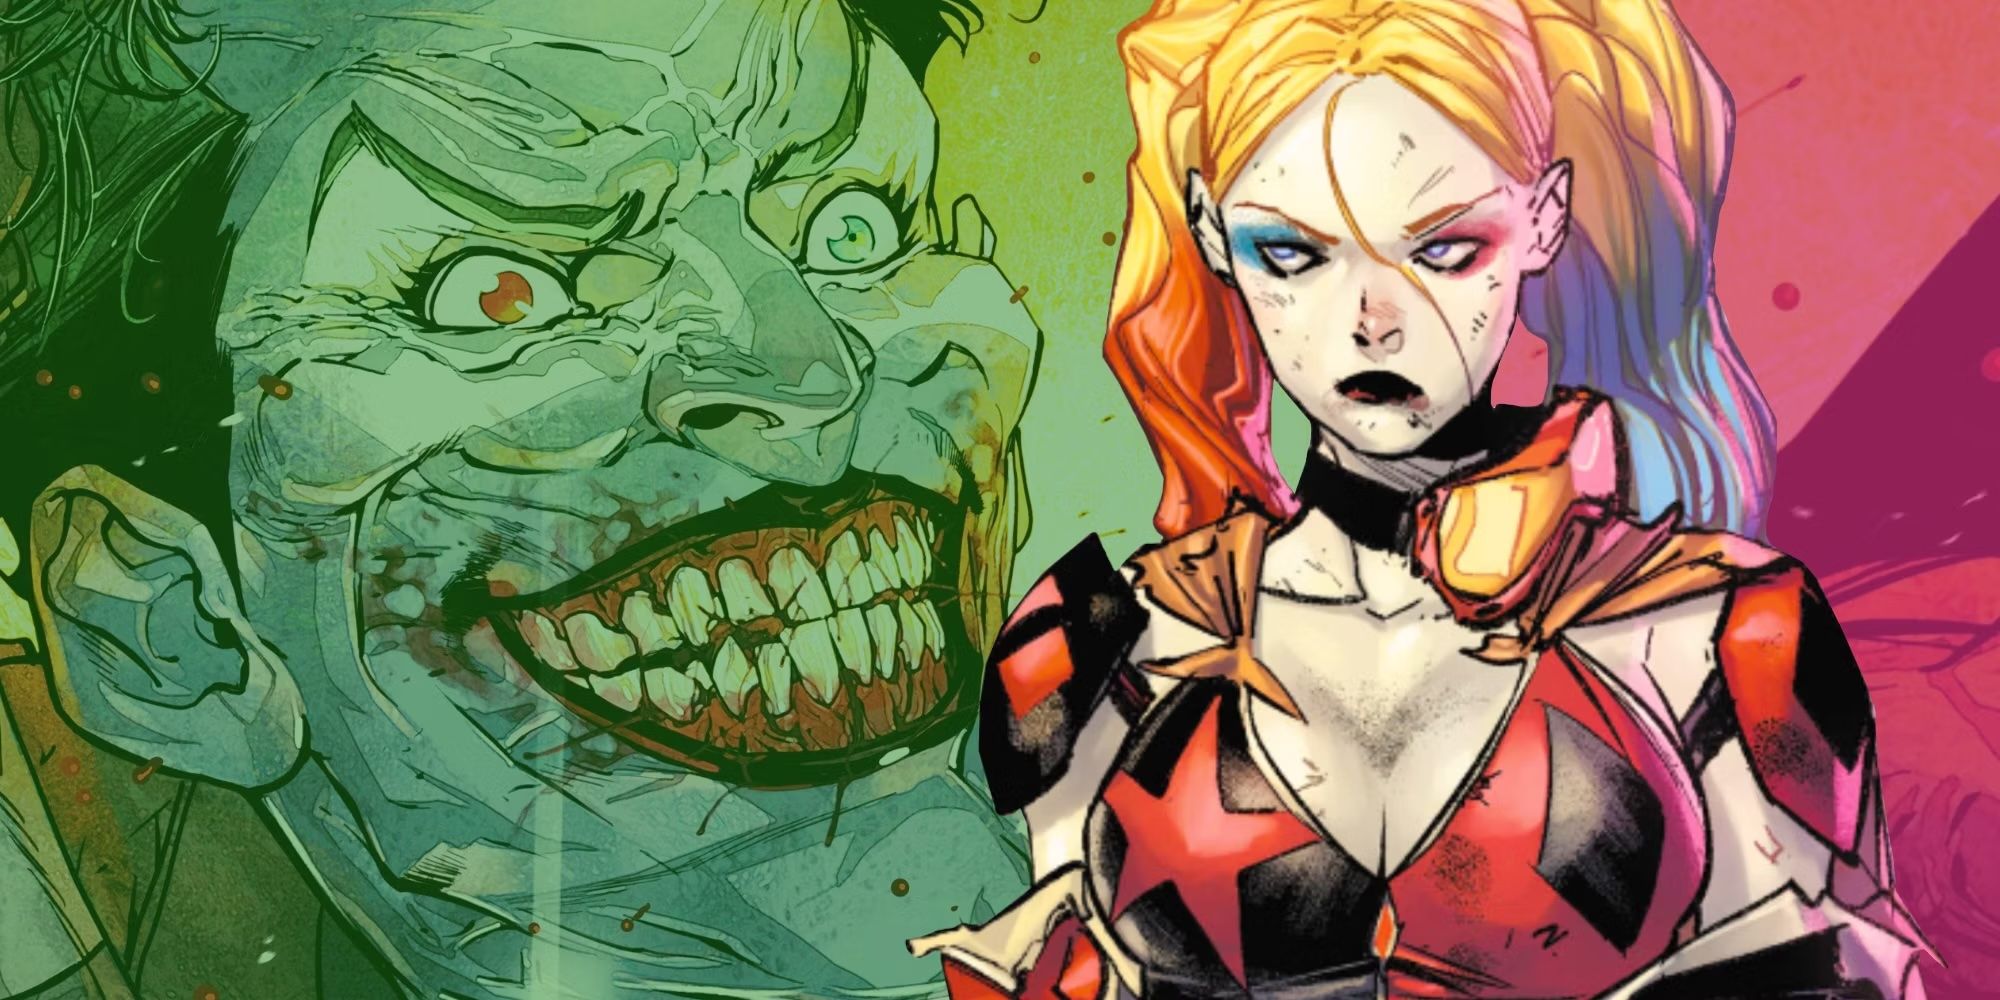 Comic book art: Angry Harley Quinn and Joker Grinning